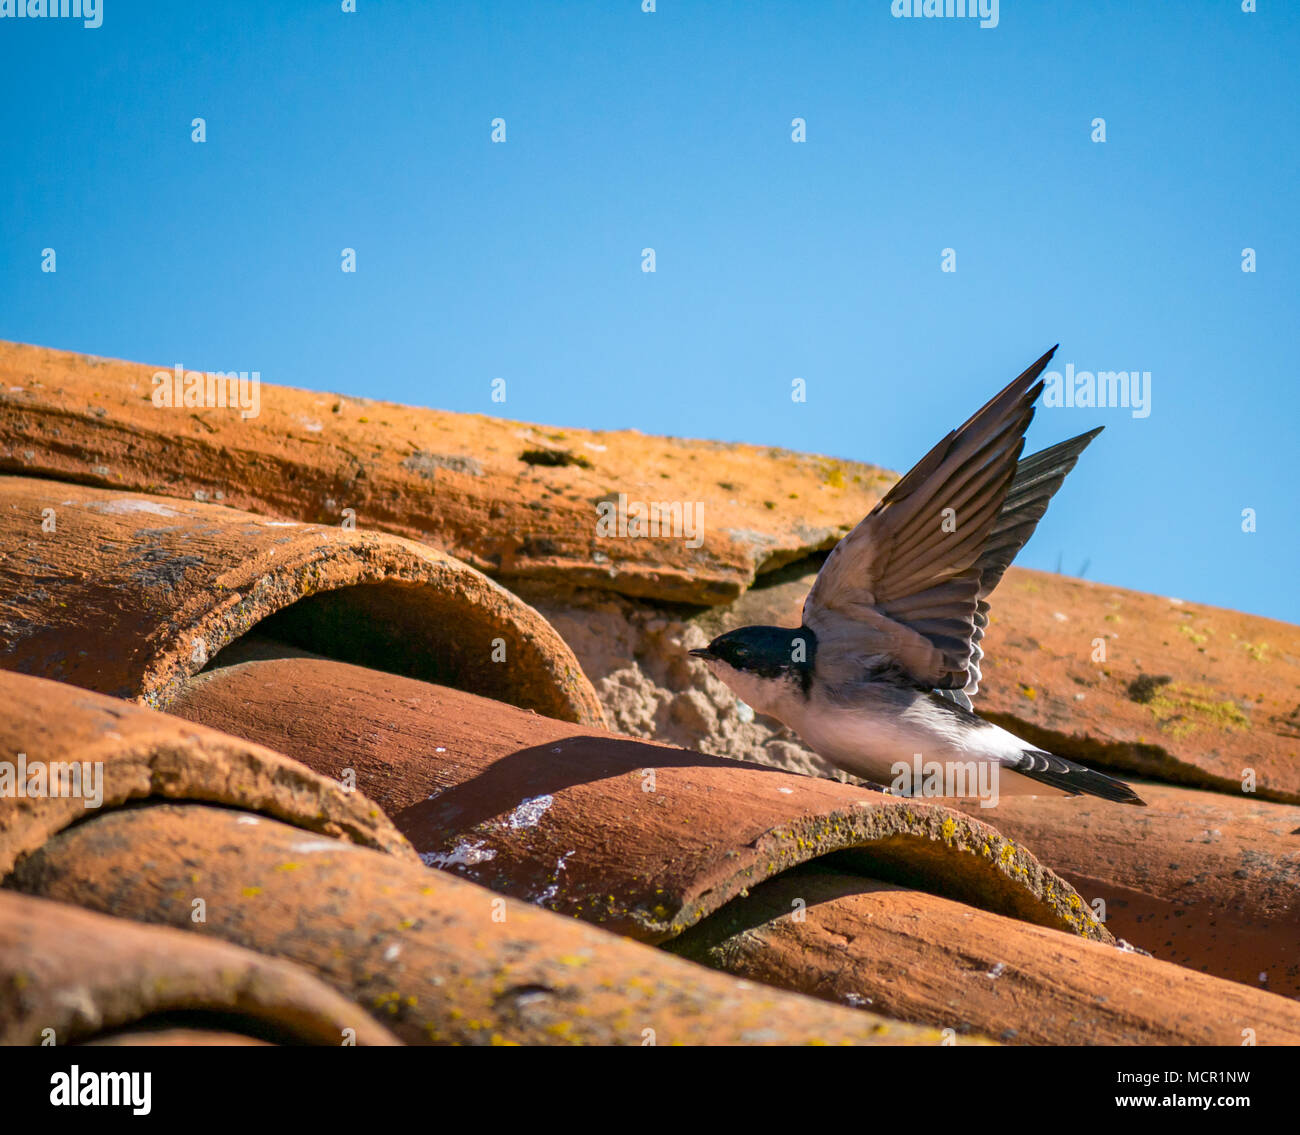 Chilean swallow, Tachycineta leucopyga,  flapping wings on tiled roof with blue sky, Chile, South America Stock Photo